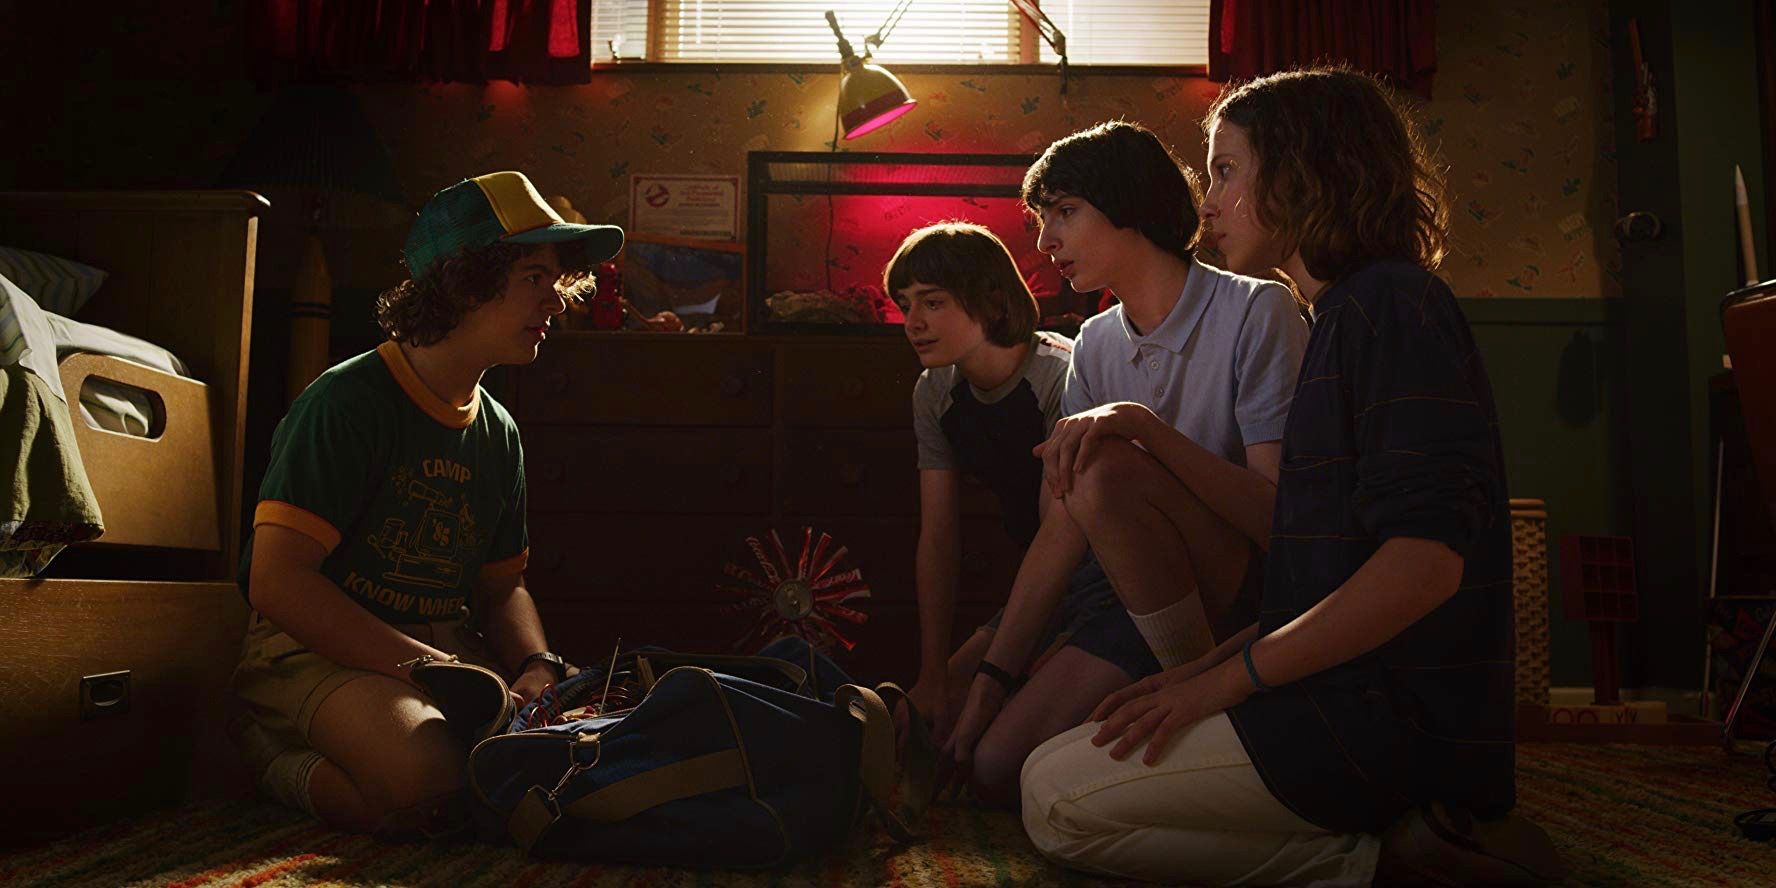 The 5 Best (& The 5 Worst) Episodes Of Stranger Things (According To IMDb)